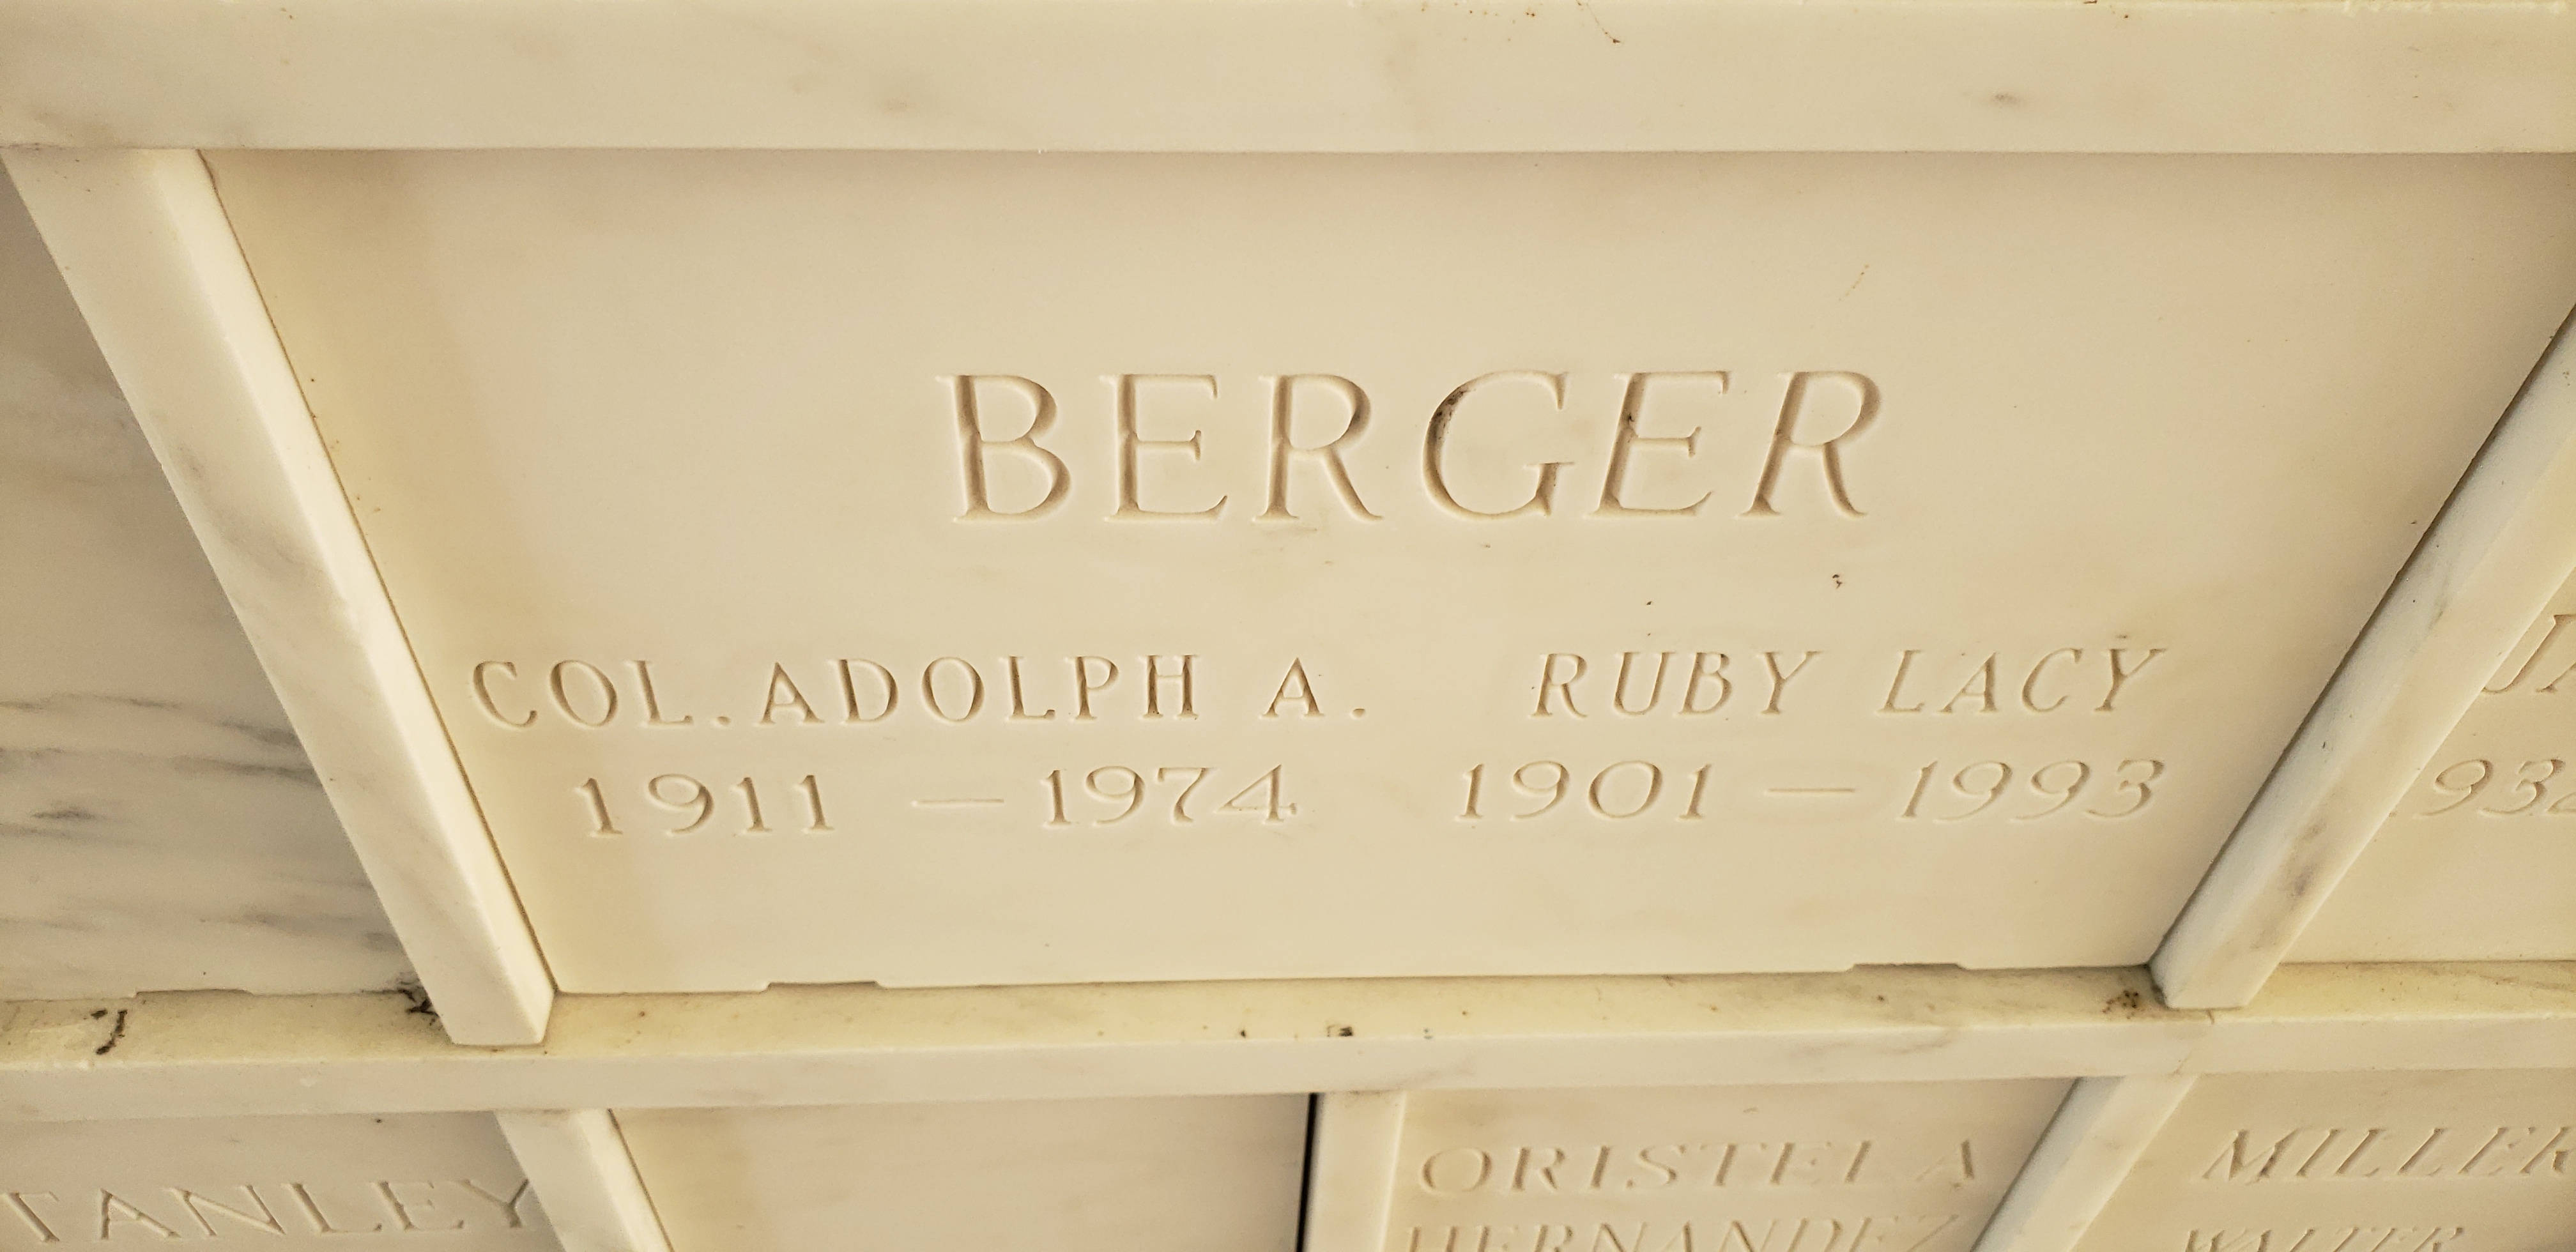 Col Adolph A Berger